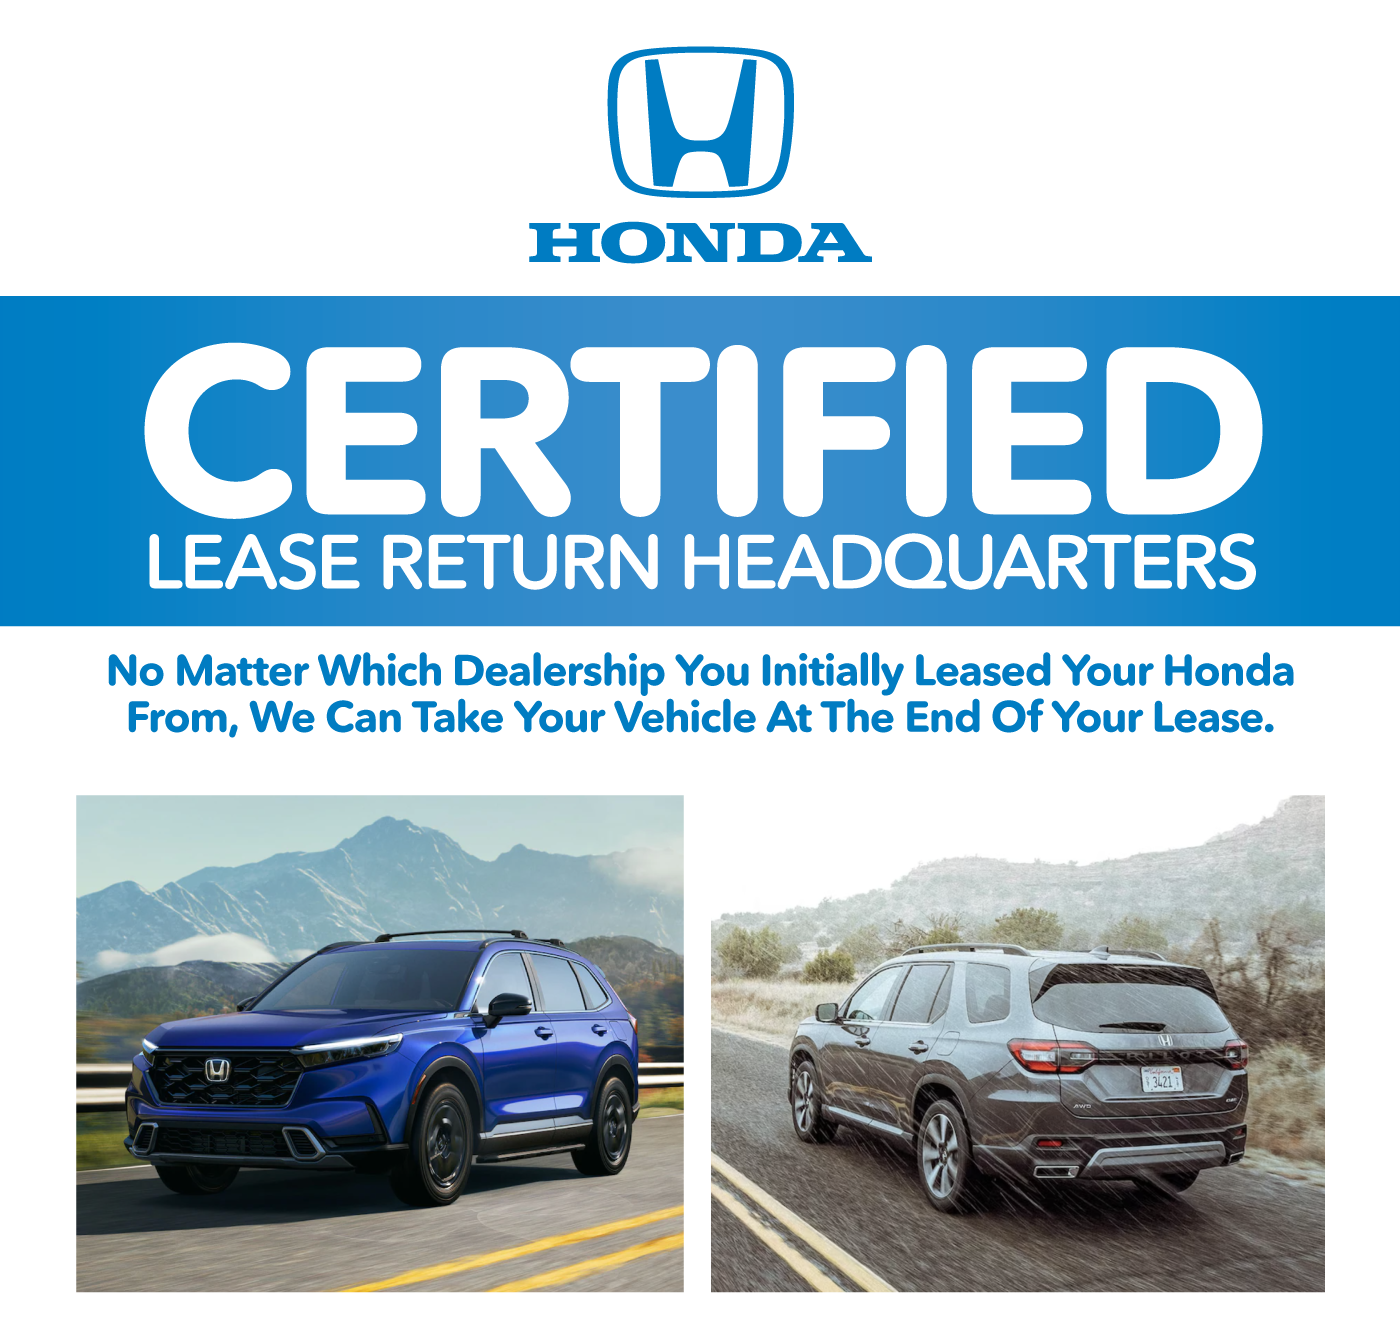 Penske Honda is Your Lease Return Headquarters | No Matter Which Dealership You Initially Leased Your Honda From, We Can Your Vehicle Back